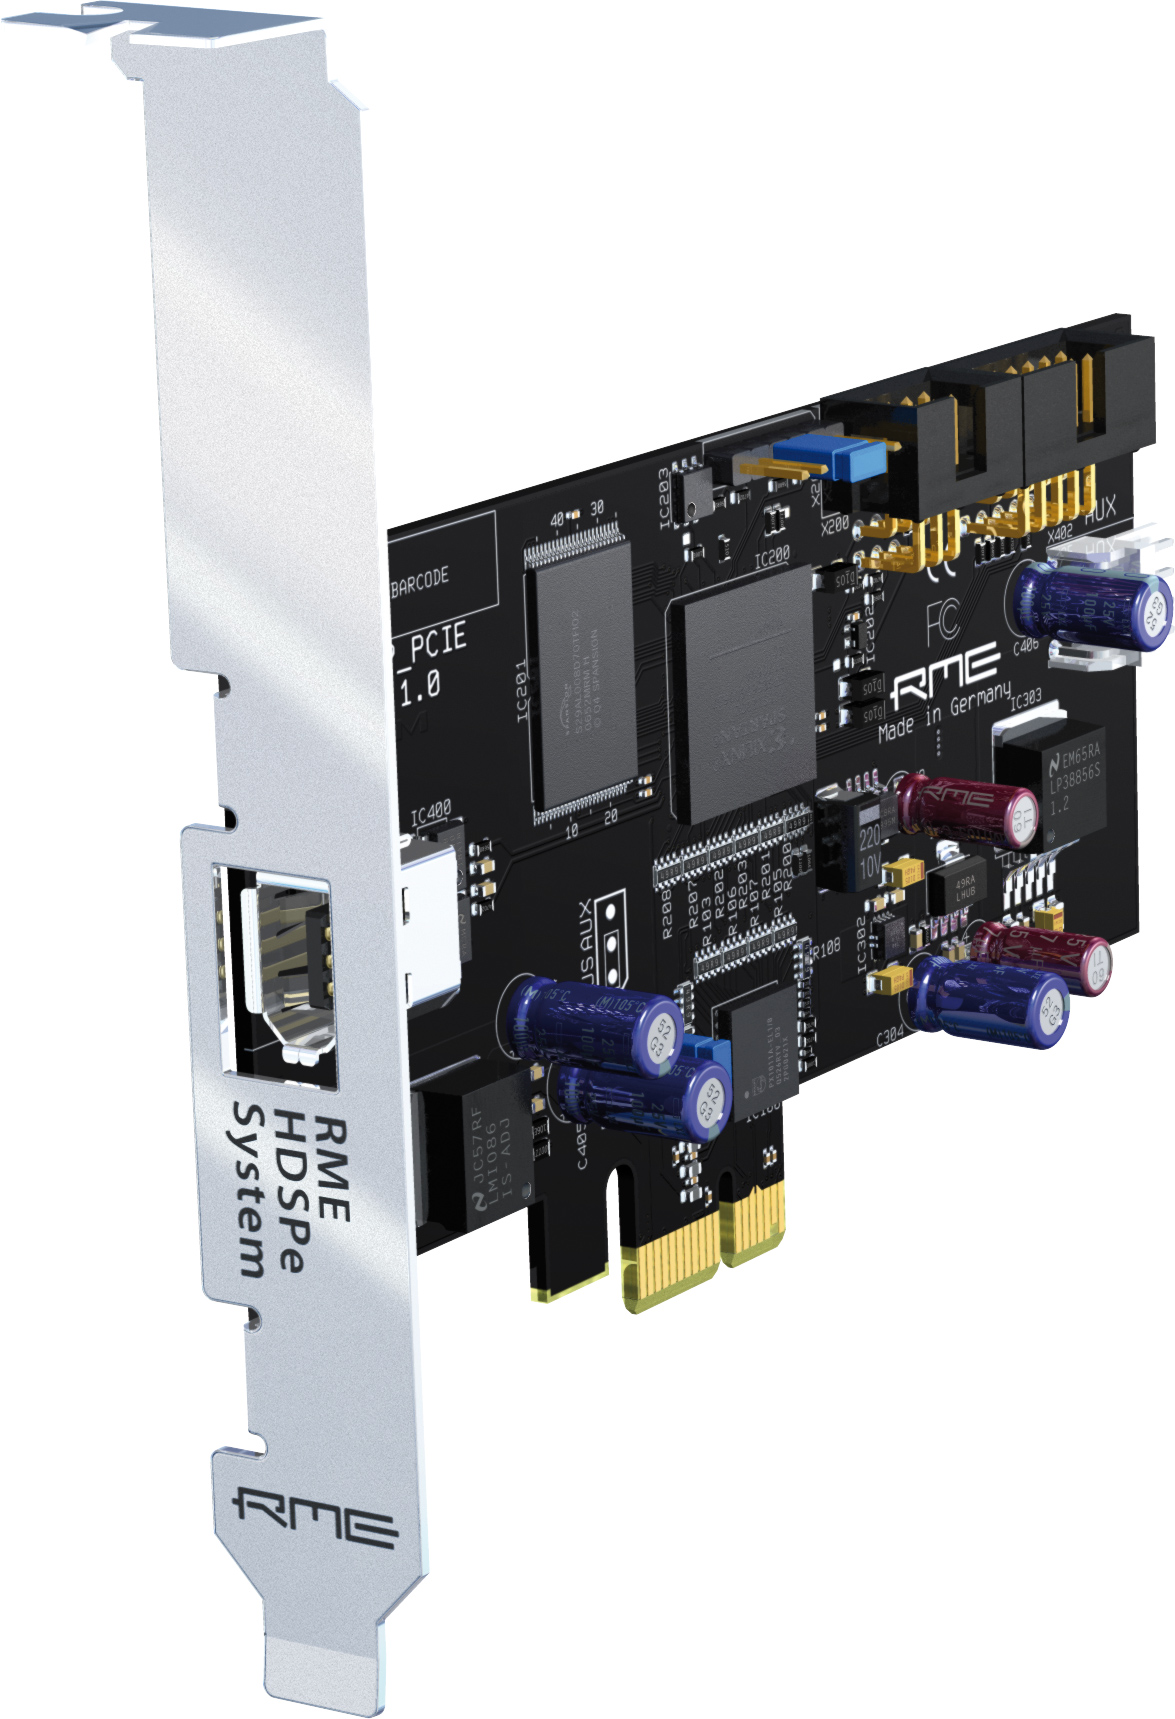 RME multiface AE, HDSPe PCI express card